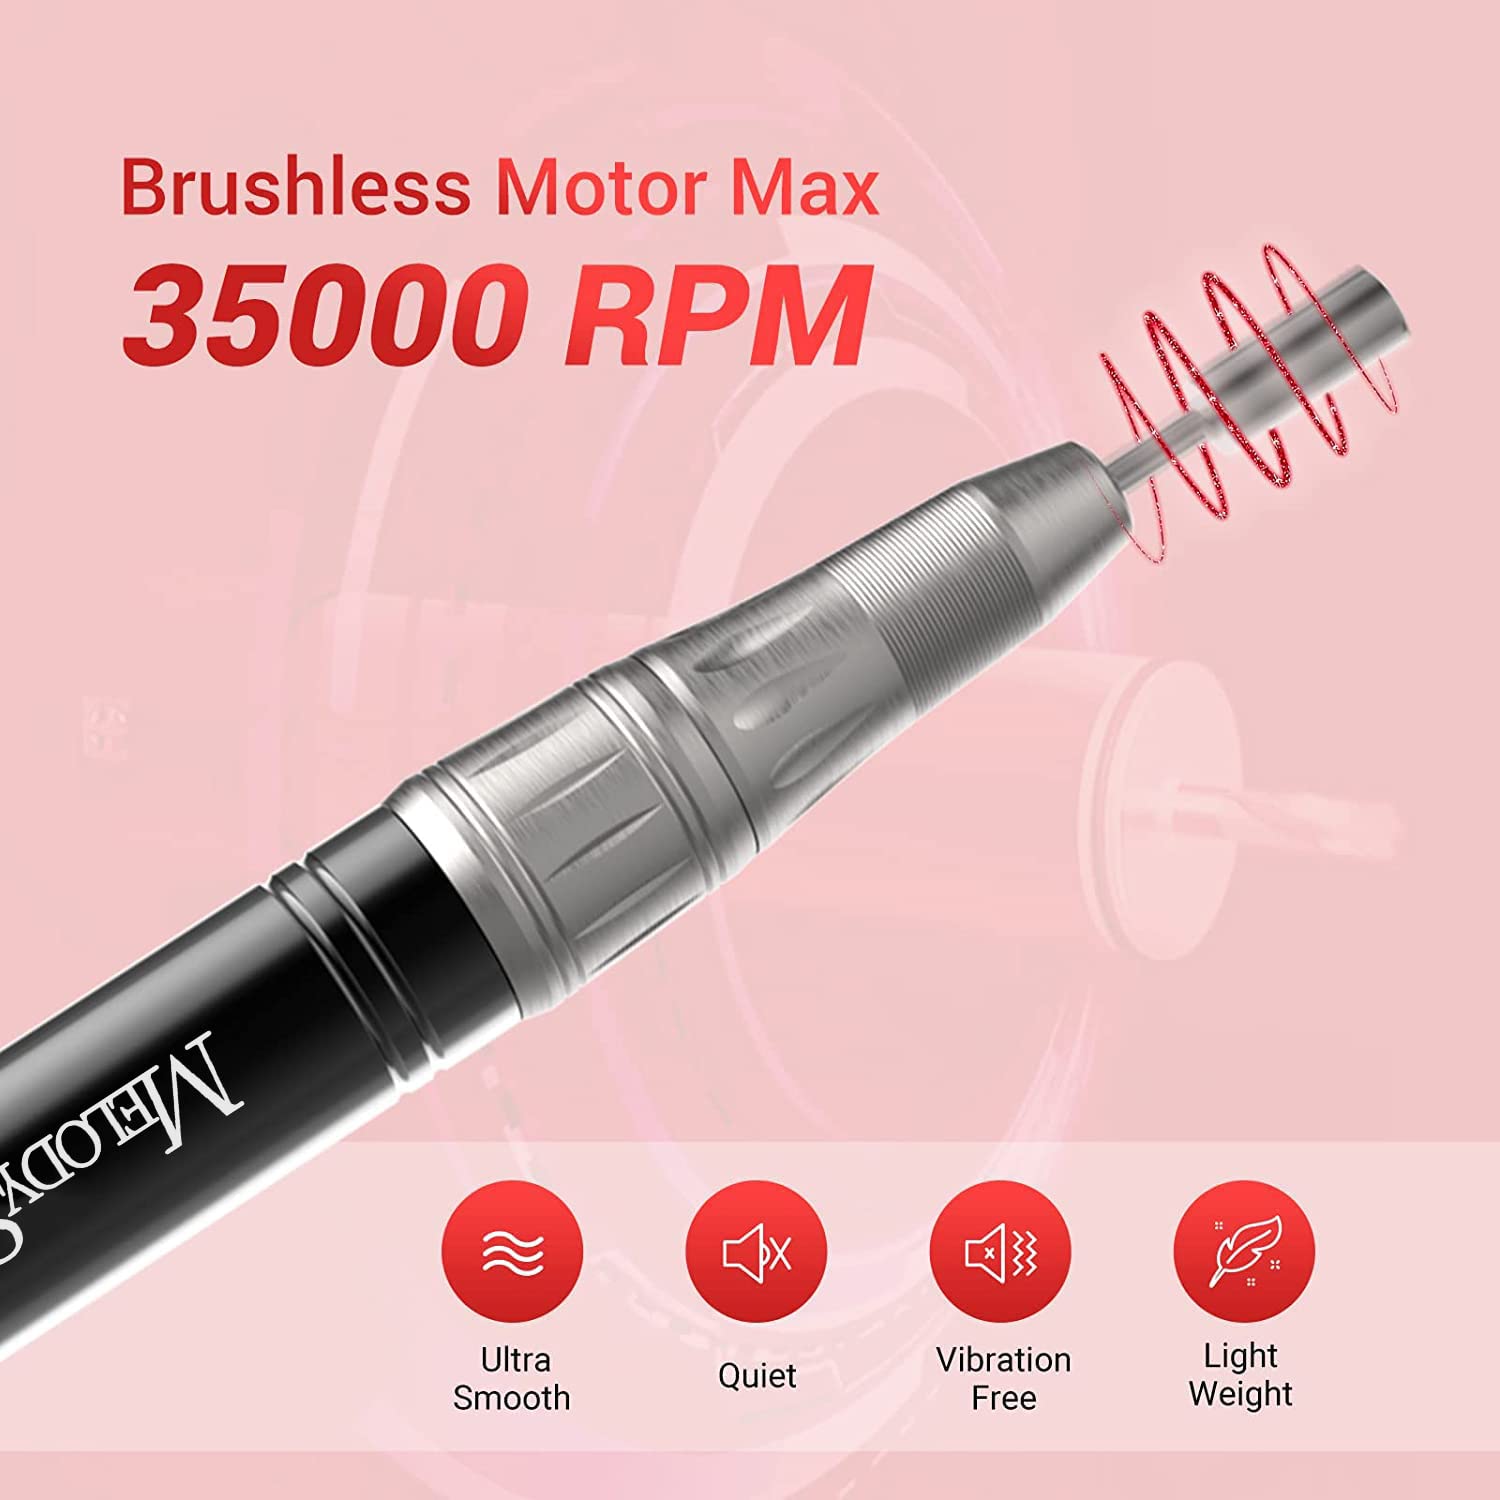 MR3-Kanon Rechargeable Nail Drill 35,000 RPM (US ONLY)